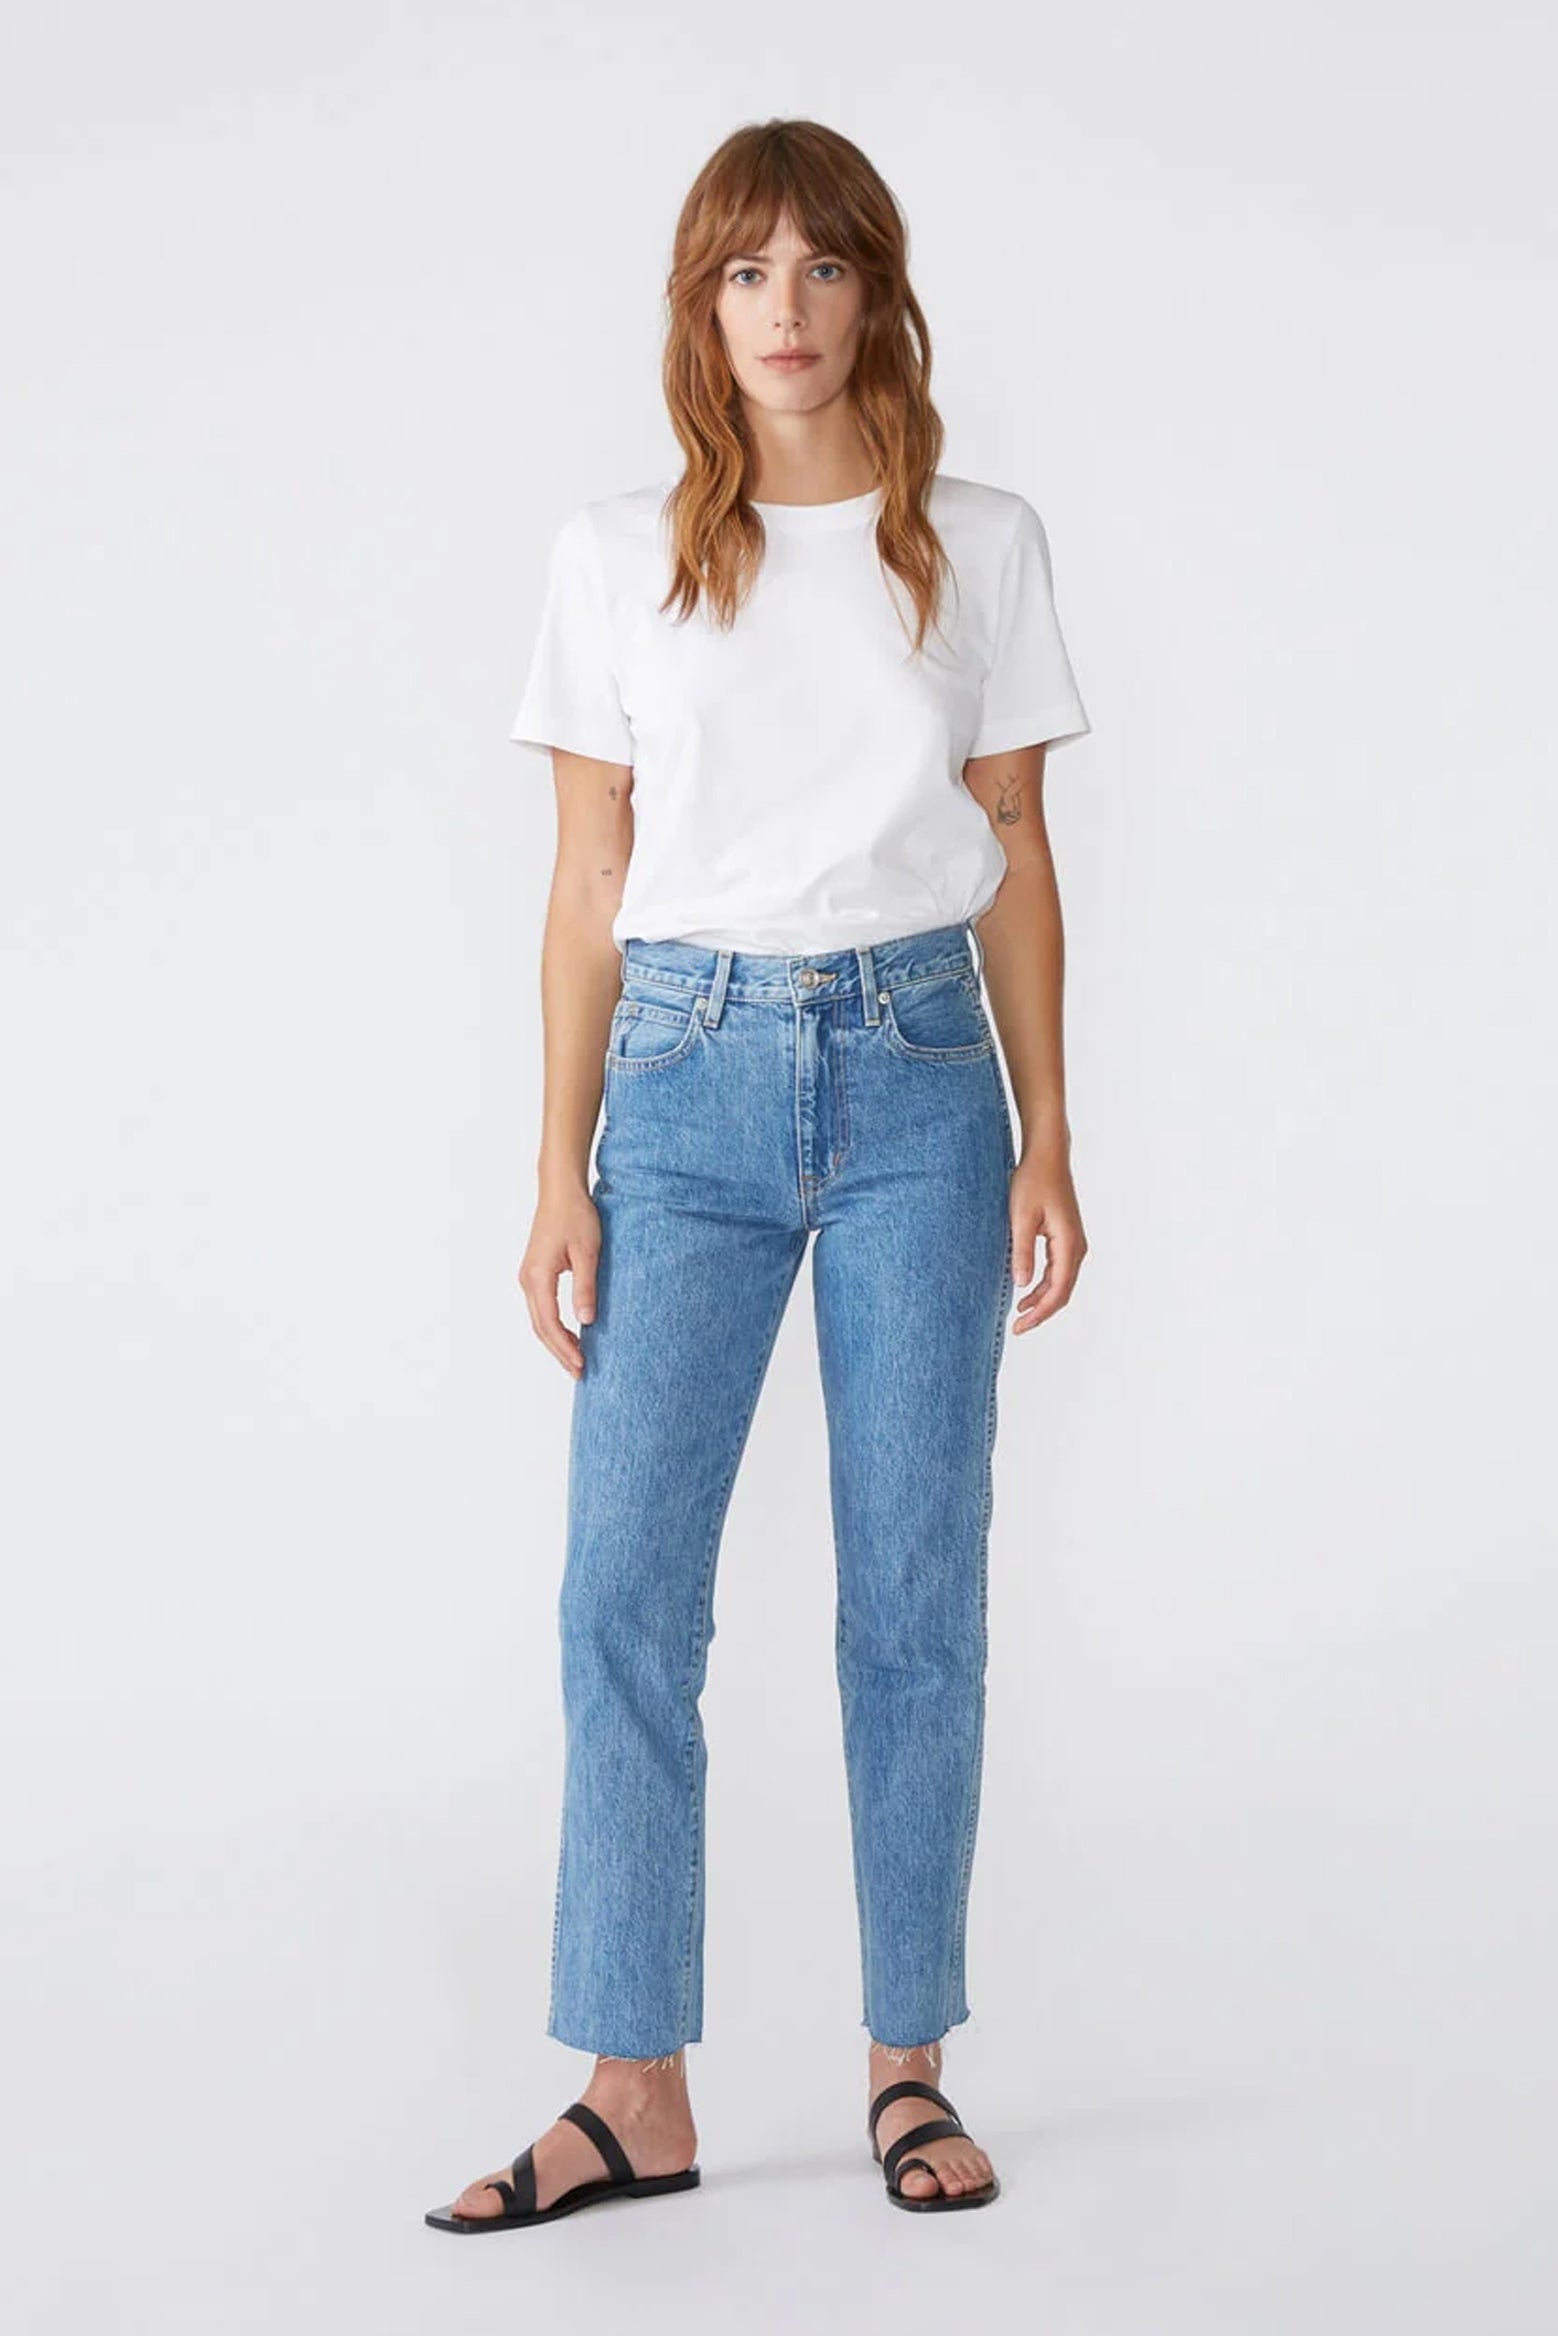 SLVRLAKE Hero High Rise Slim Leg Jean in Pacific from The New Trend